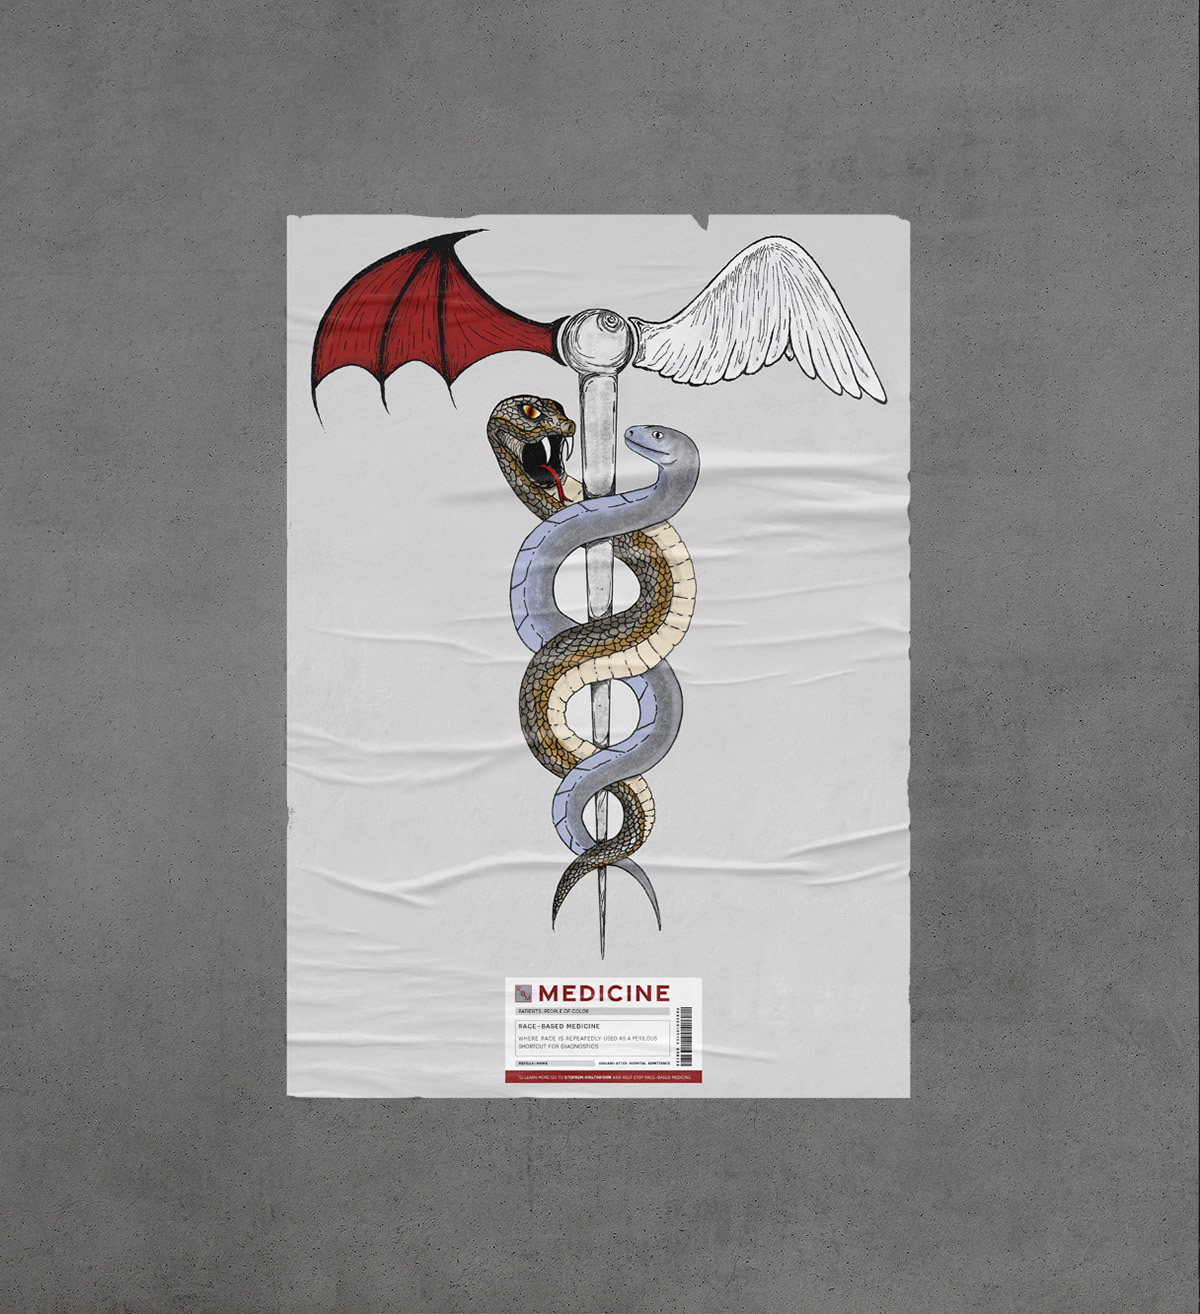 Poster with caduceus symbol featuring two snakes and wings on concrete background. Text warns against race-based medicine as a risky shortcut to diagnosis.